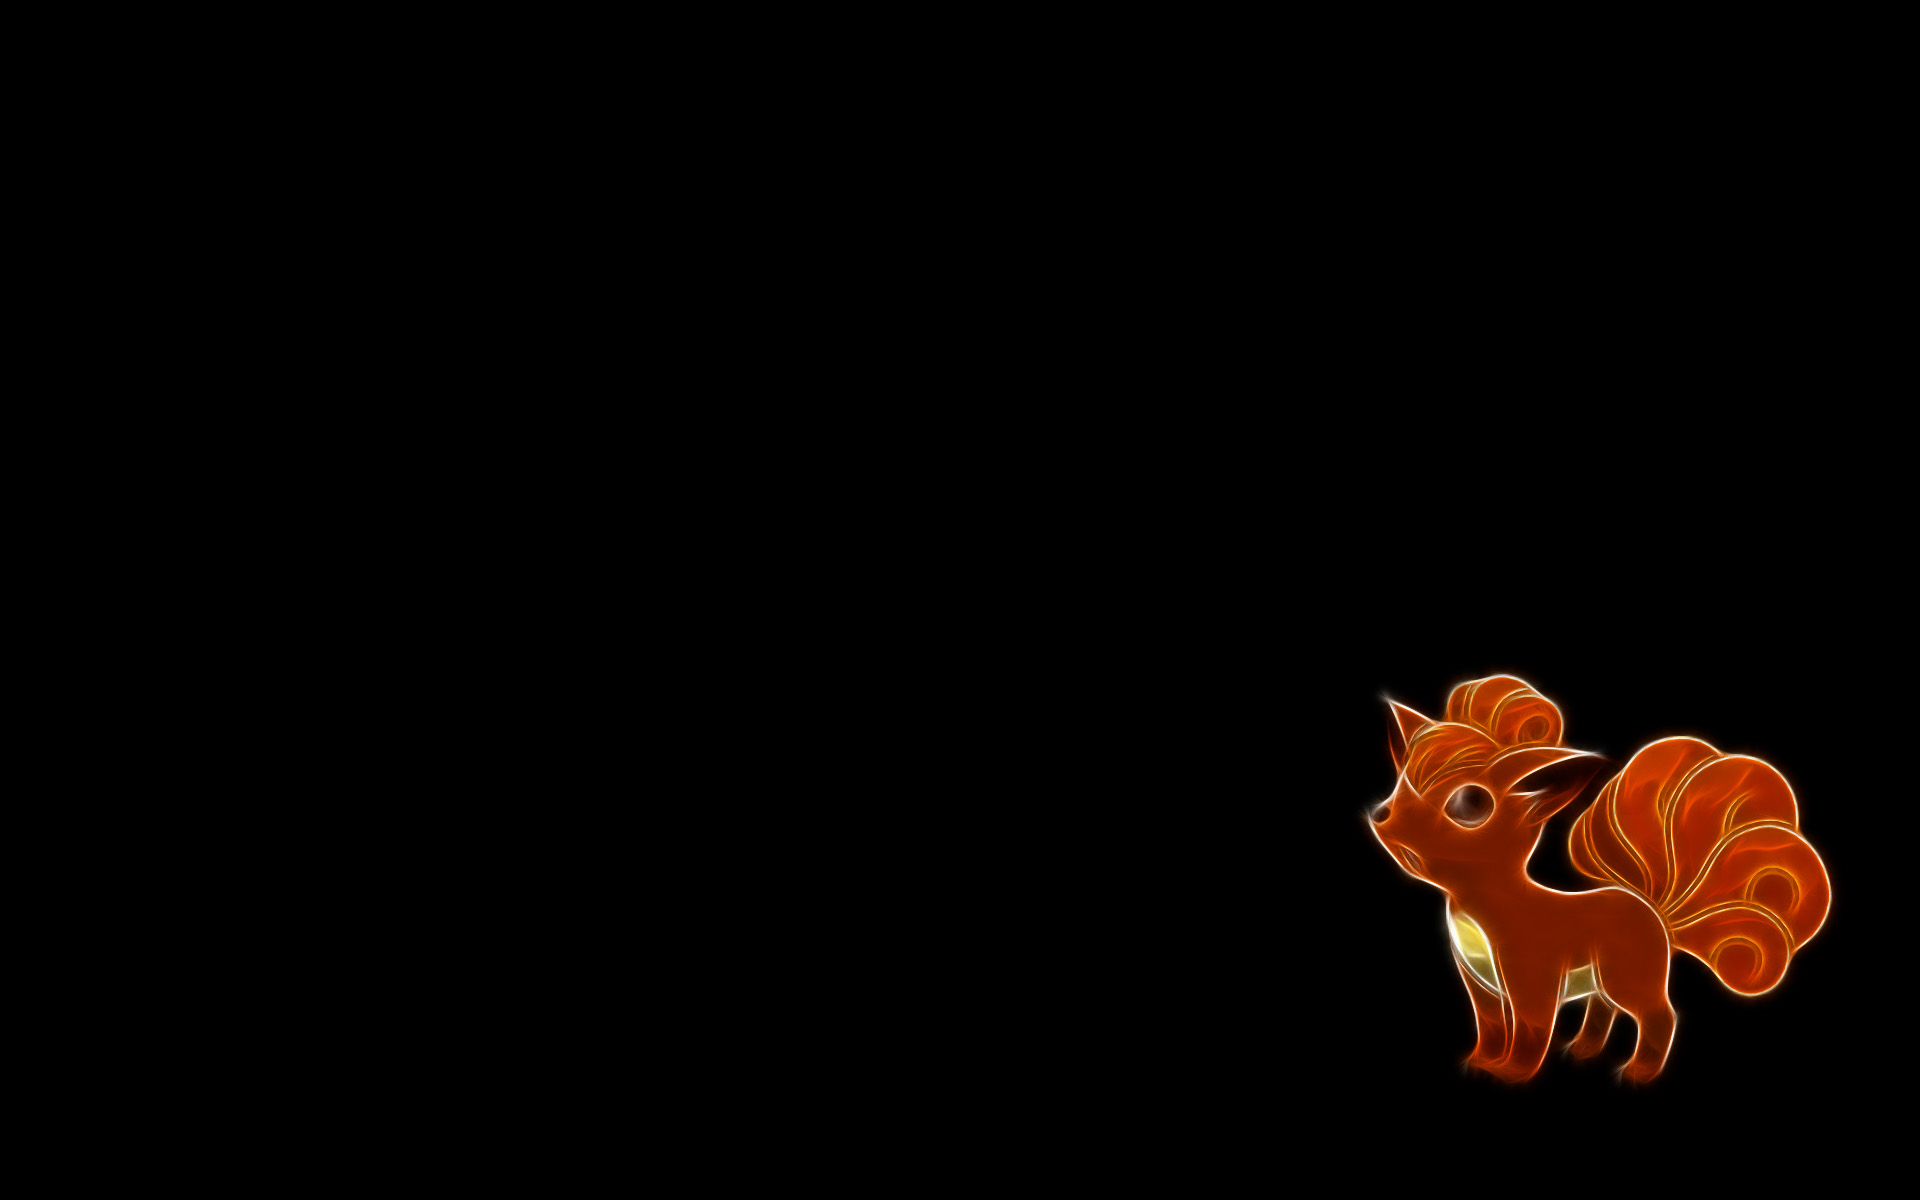 A majestic fire Pokémon, Vulpix, from the popular anime Pokémon, gracefully poses in this desktop wallpaper.